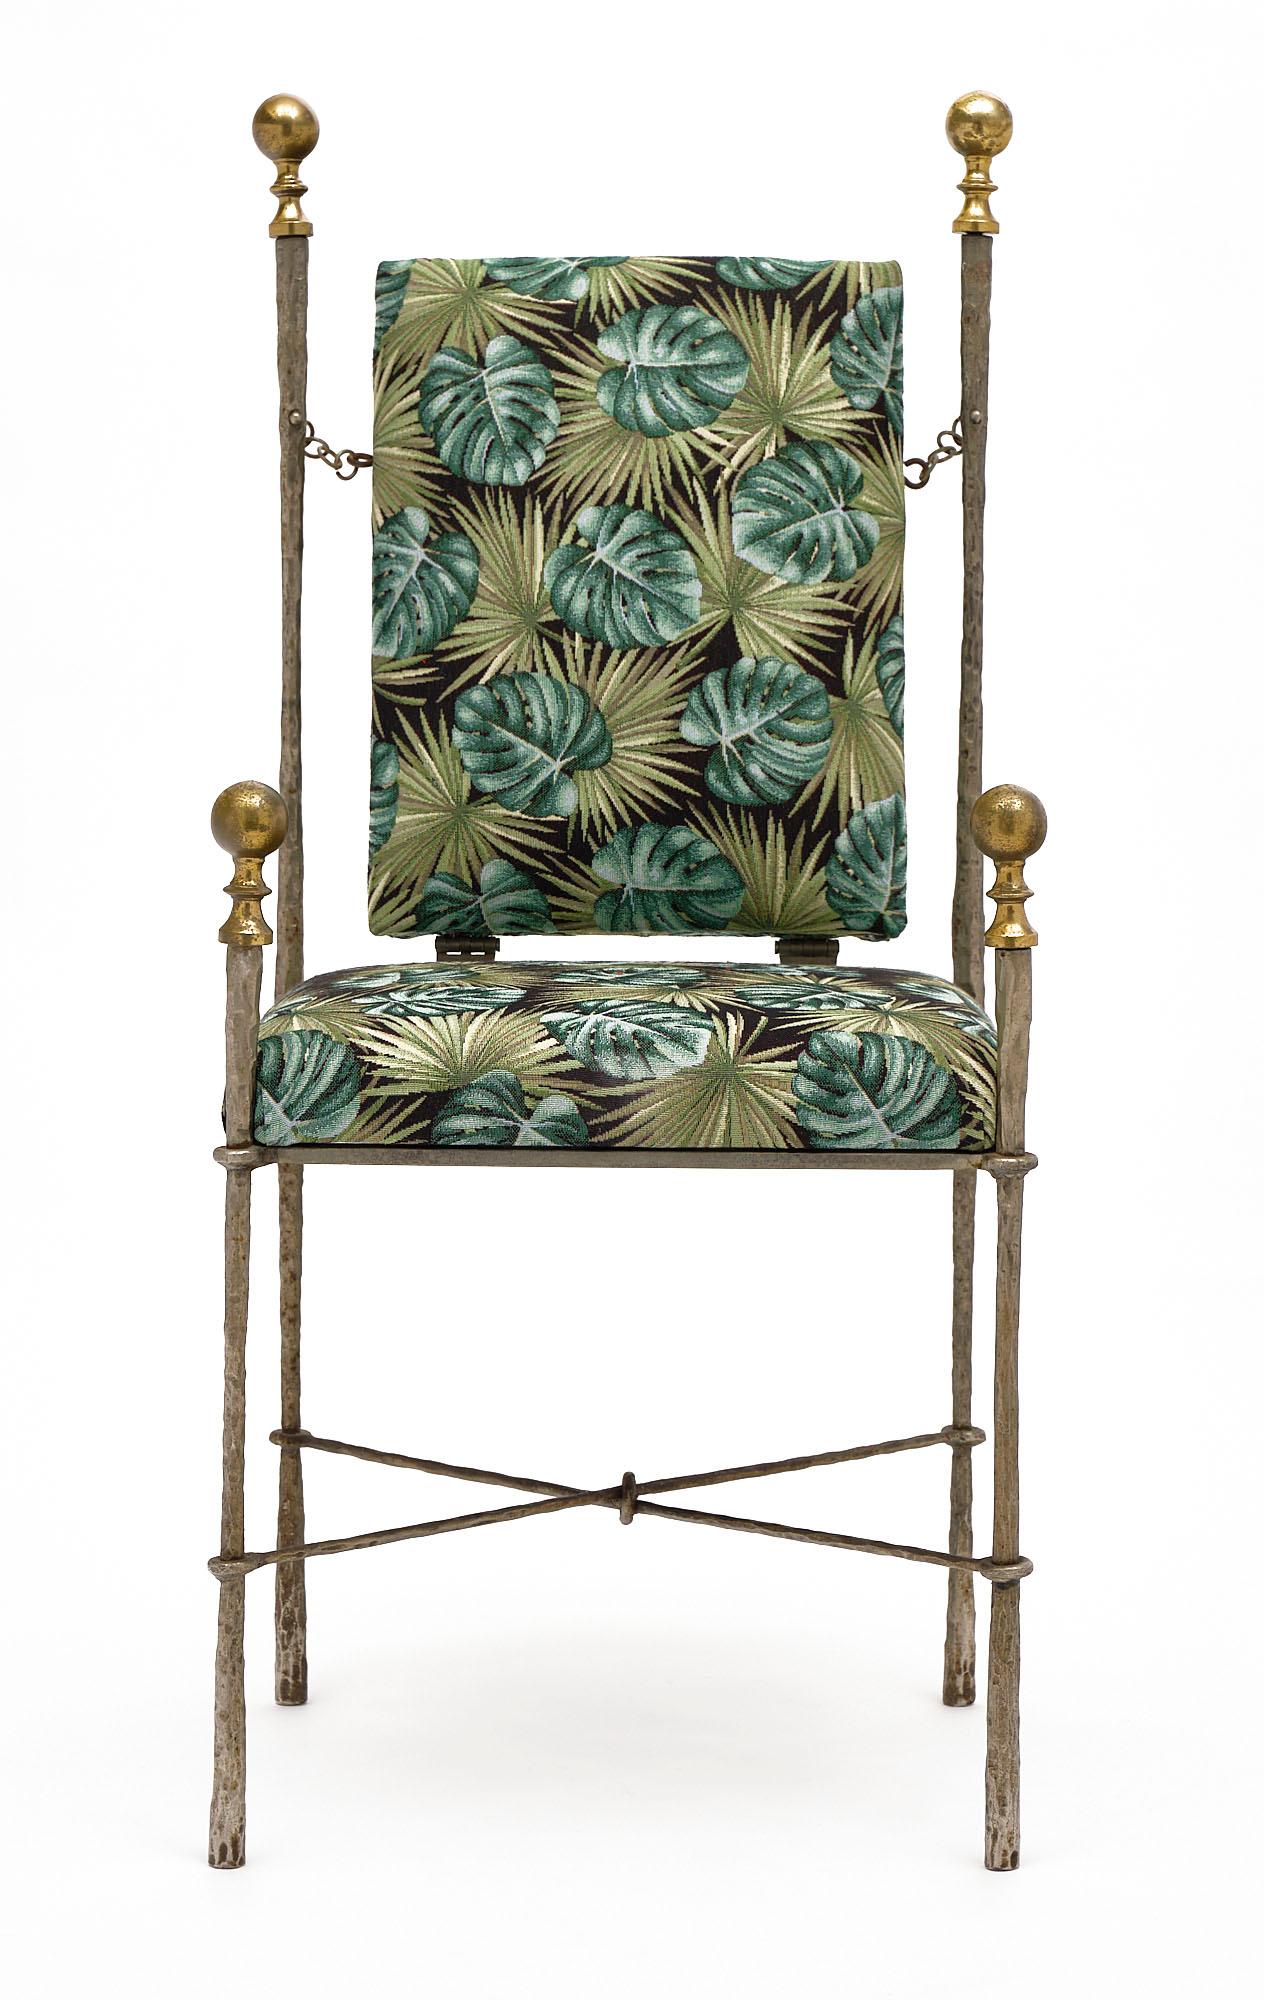 Italian armchair in the manner of Swiss sculptor Diego Giacometti. We love the hand-hammered, forged, and polished steel with bronze finials. The new upholstery is a palm leaf wool blend. This piece is in excellent vintage condition.